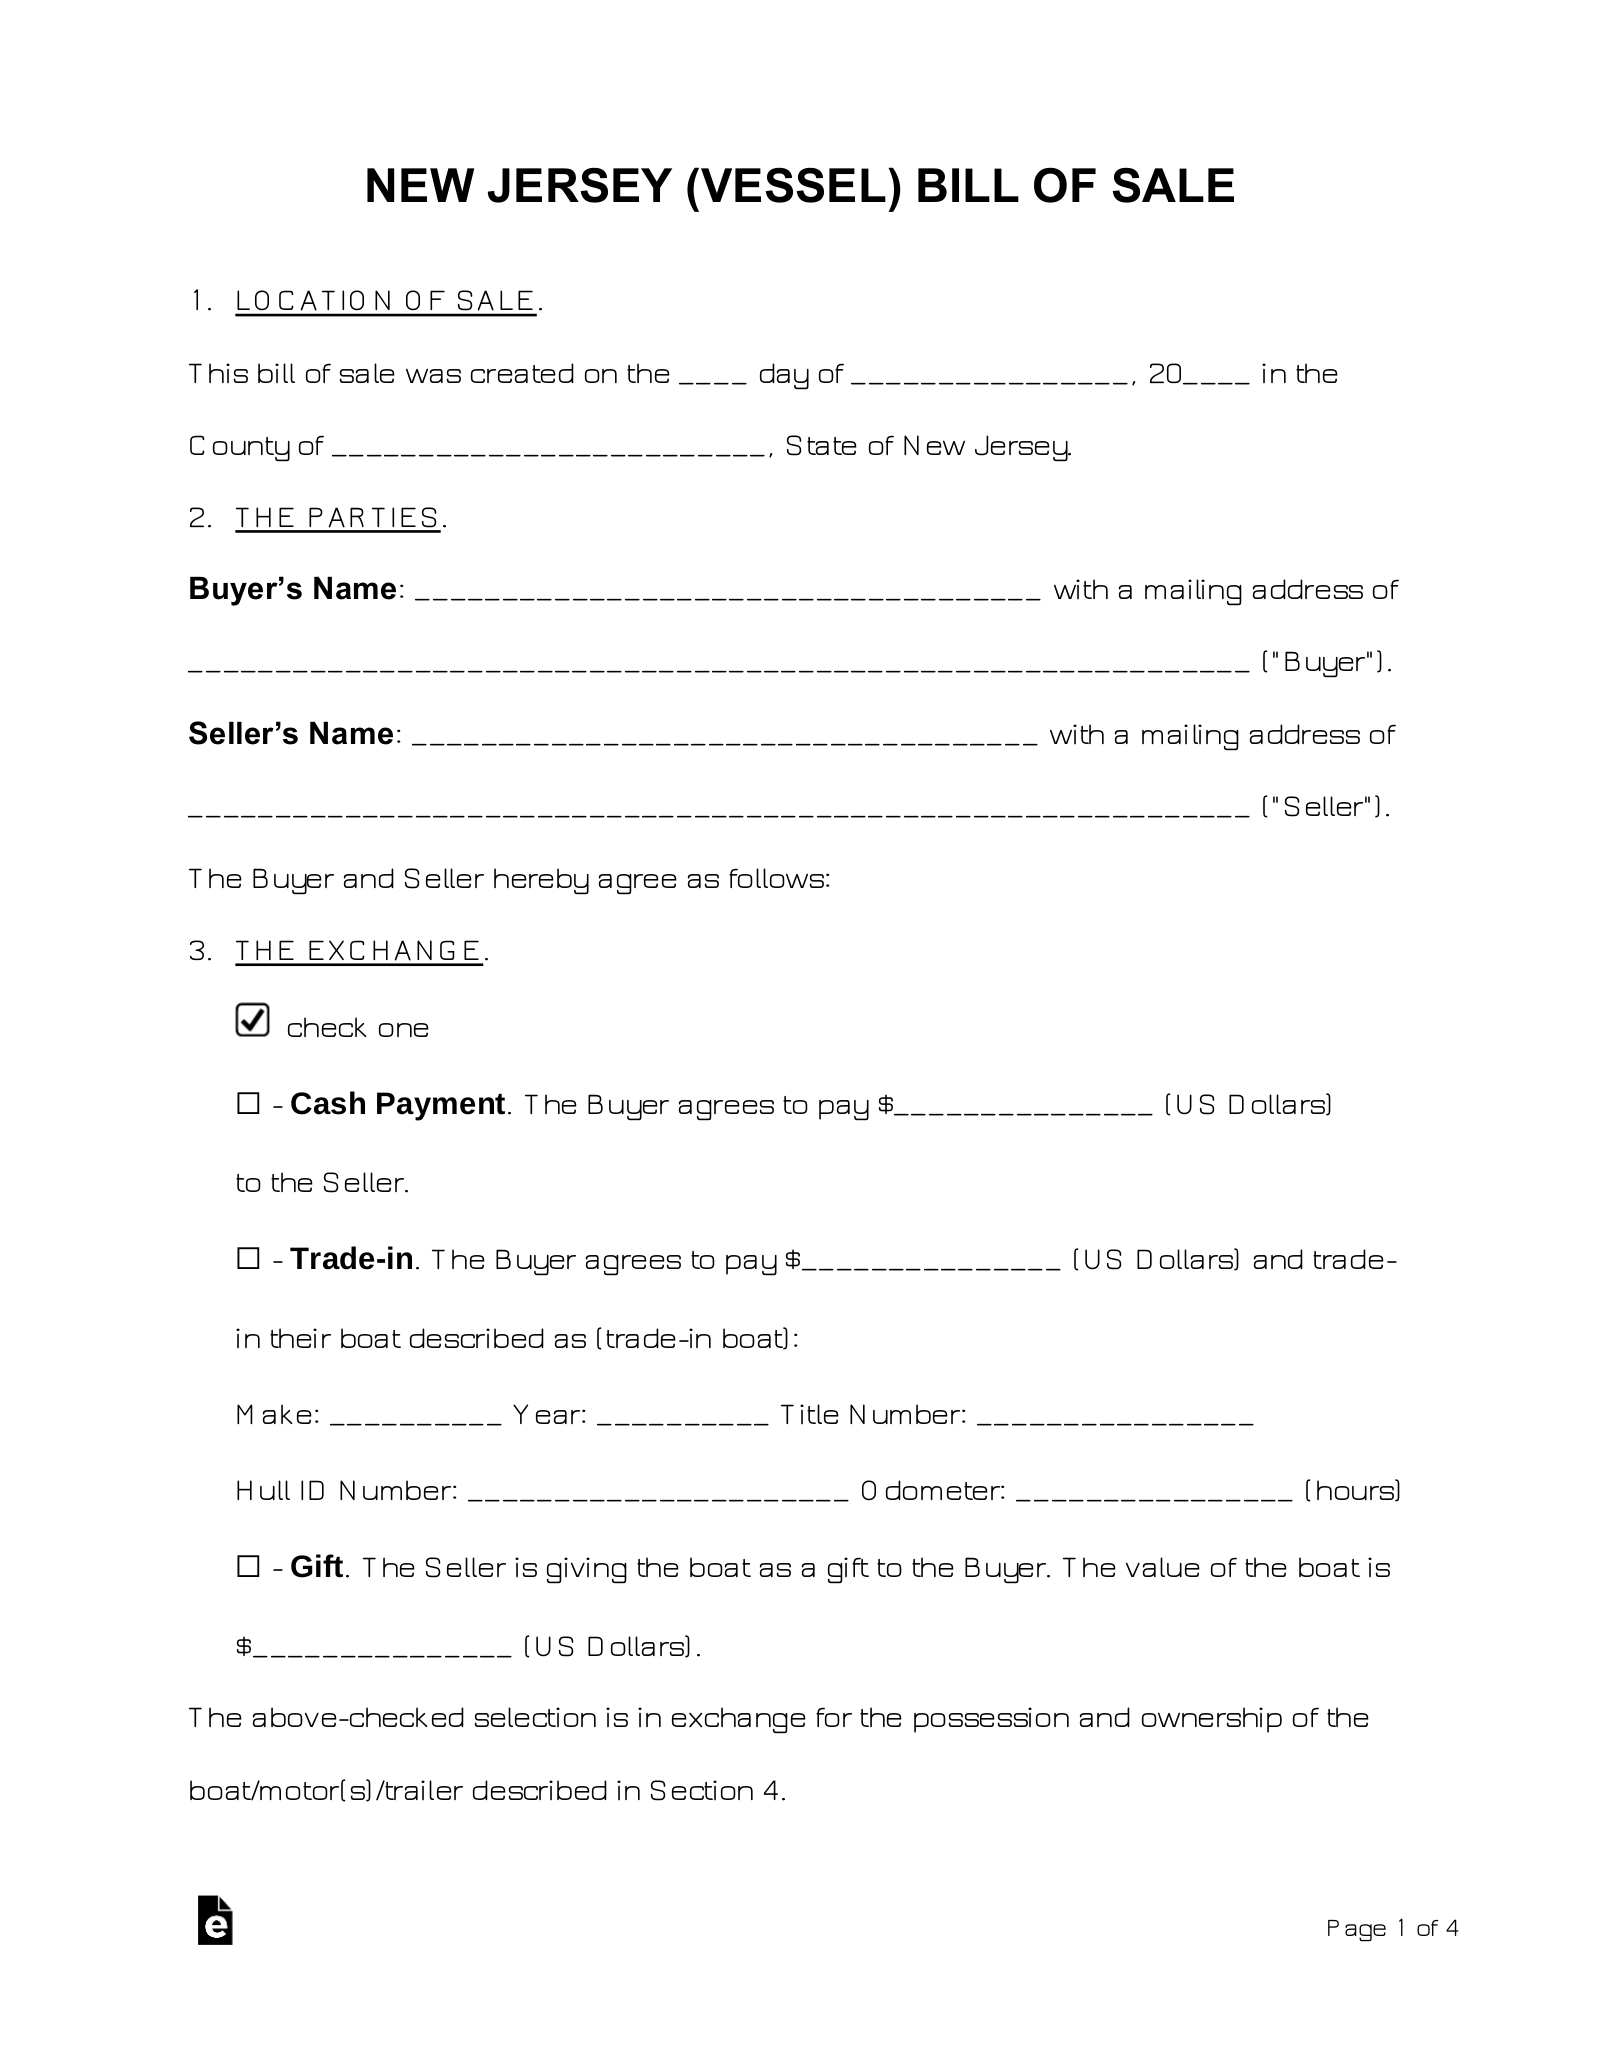 free-new-jersey-boat-bill-of-sale-form-pdf-word-eforms